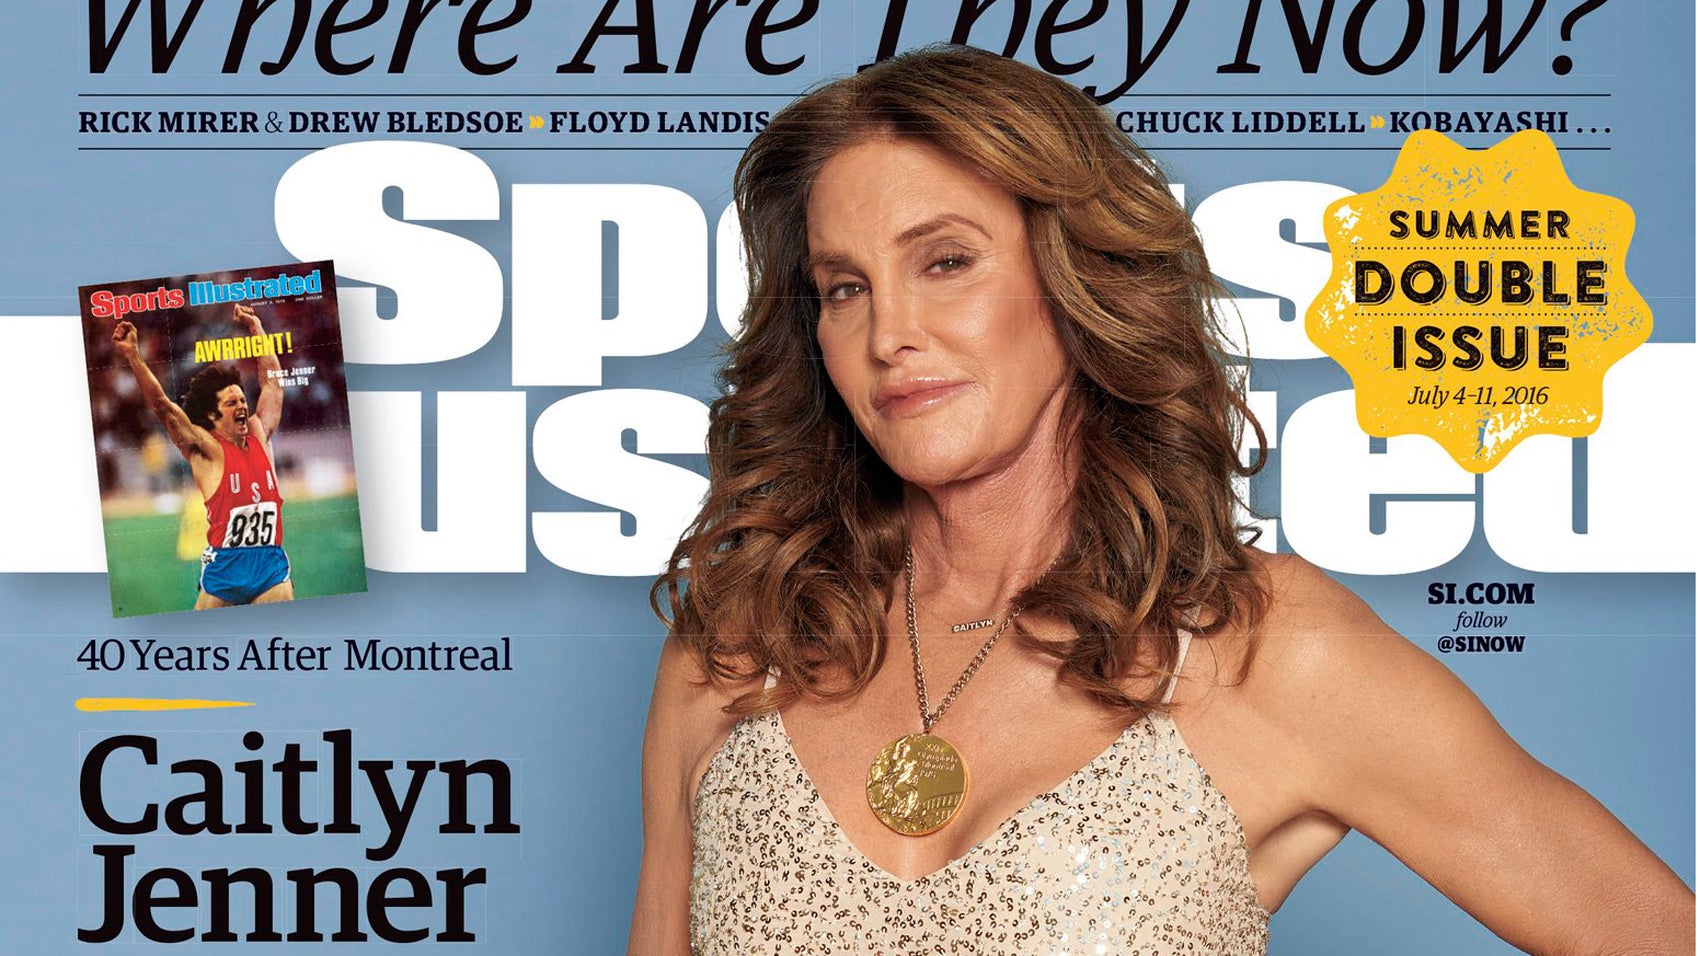 Caitlyn Jenner, formerly Bruce Jenner, debuts on the cover of